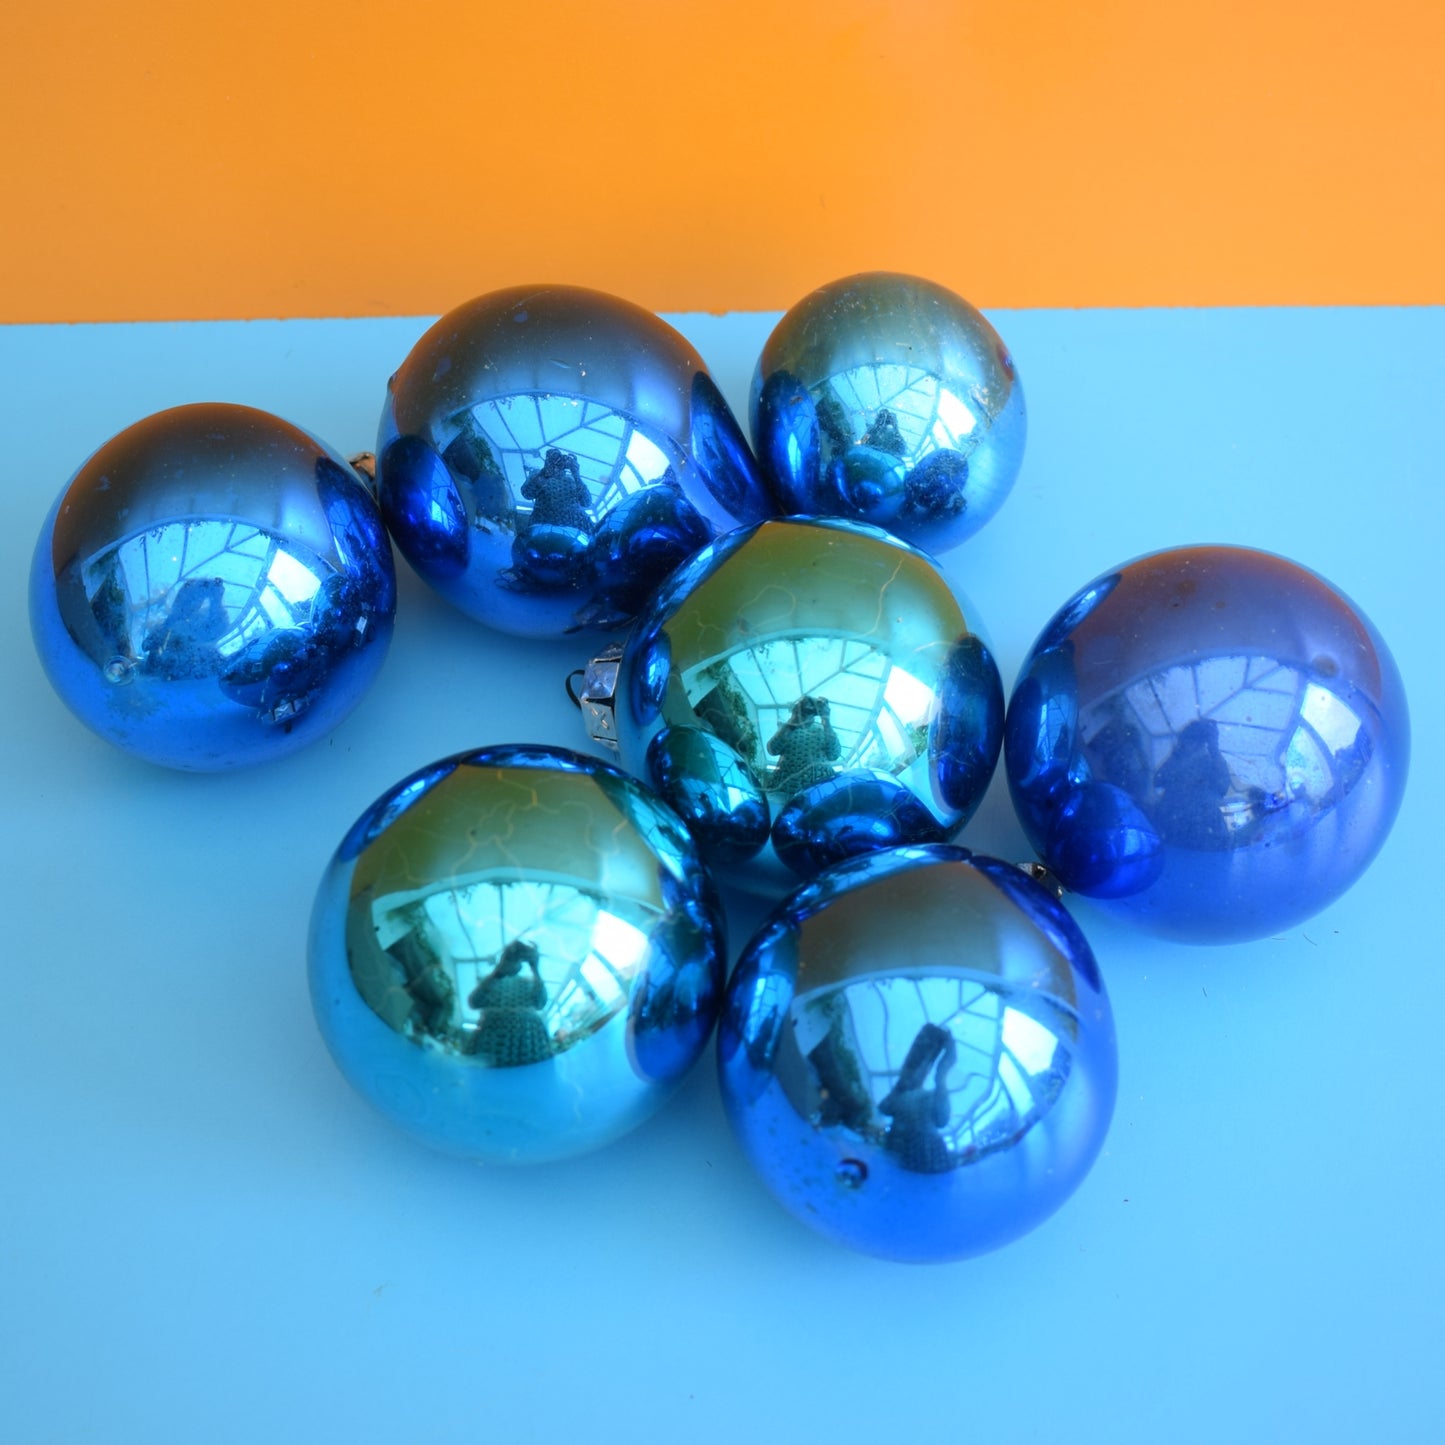 Vintage 1960s Glass Christmas Bauble Group - Blue